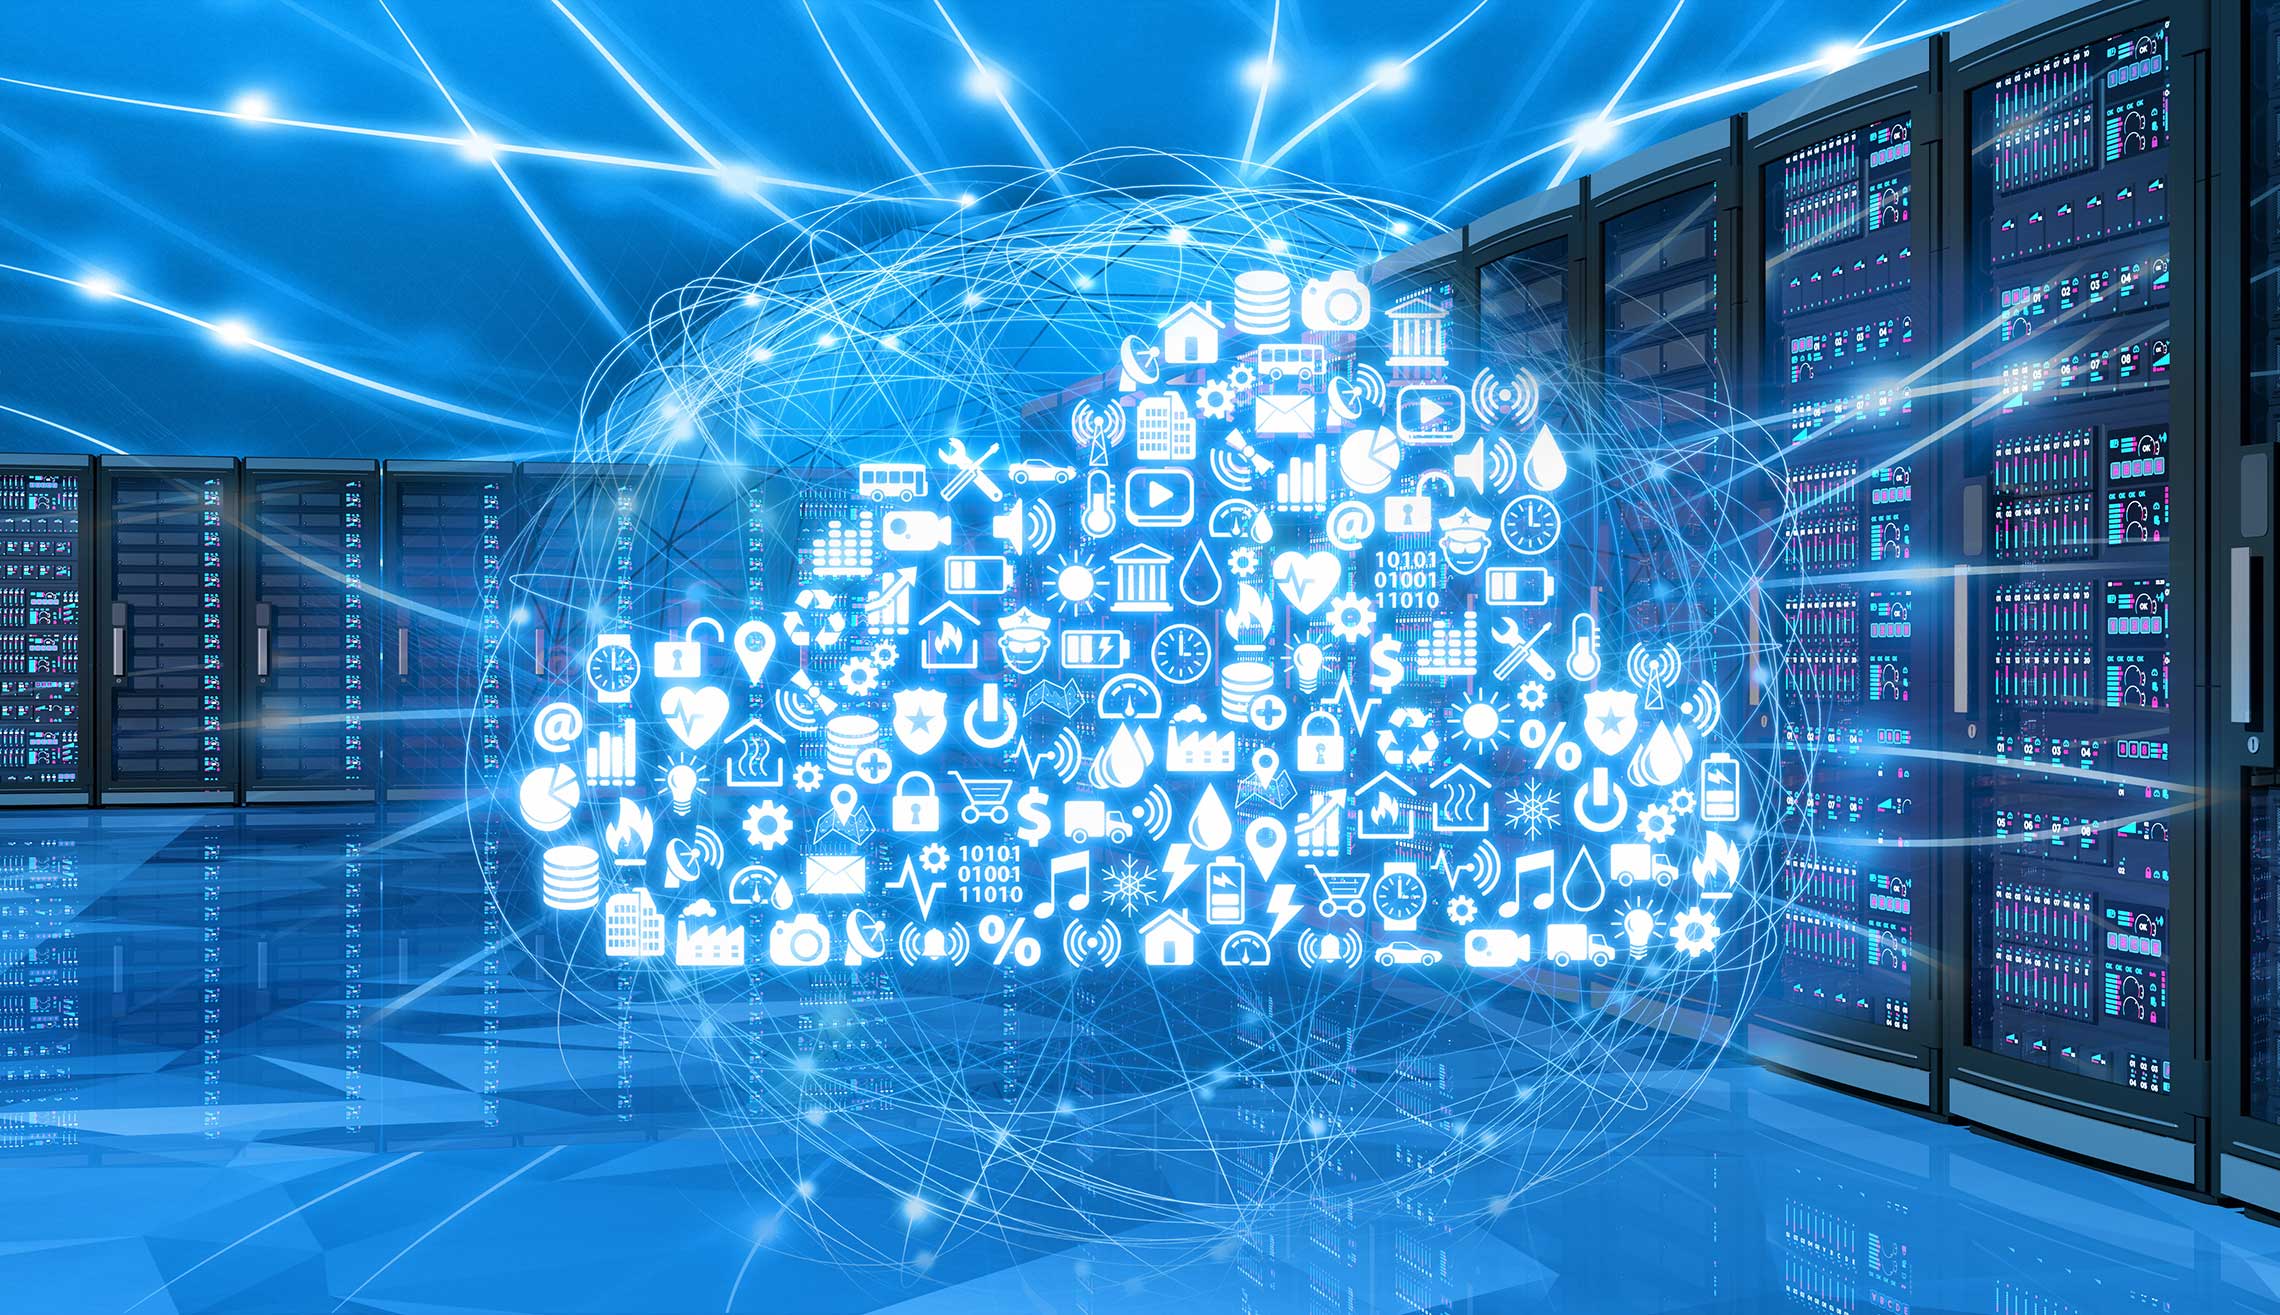 Why choose the Cloud? Here are all the advantages of Cloud Computing